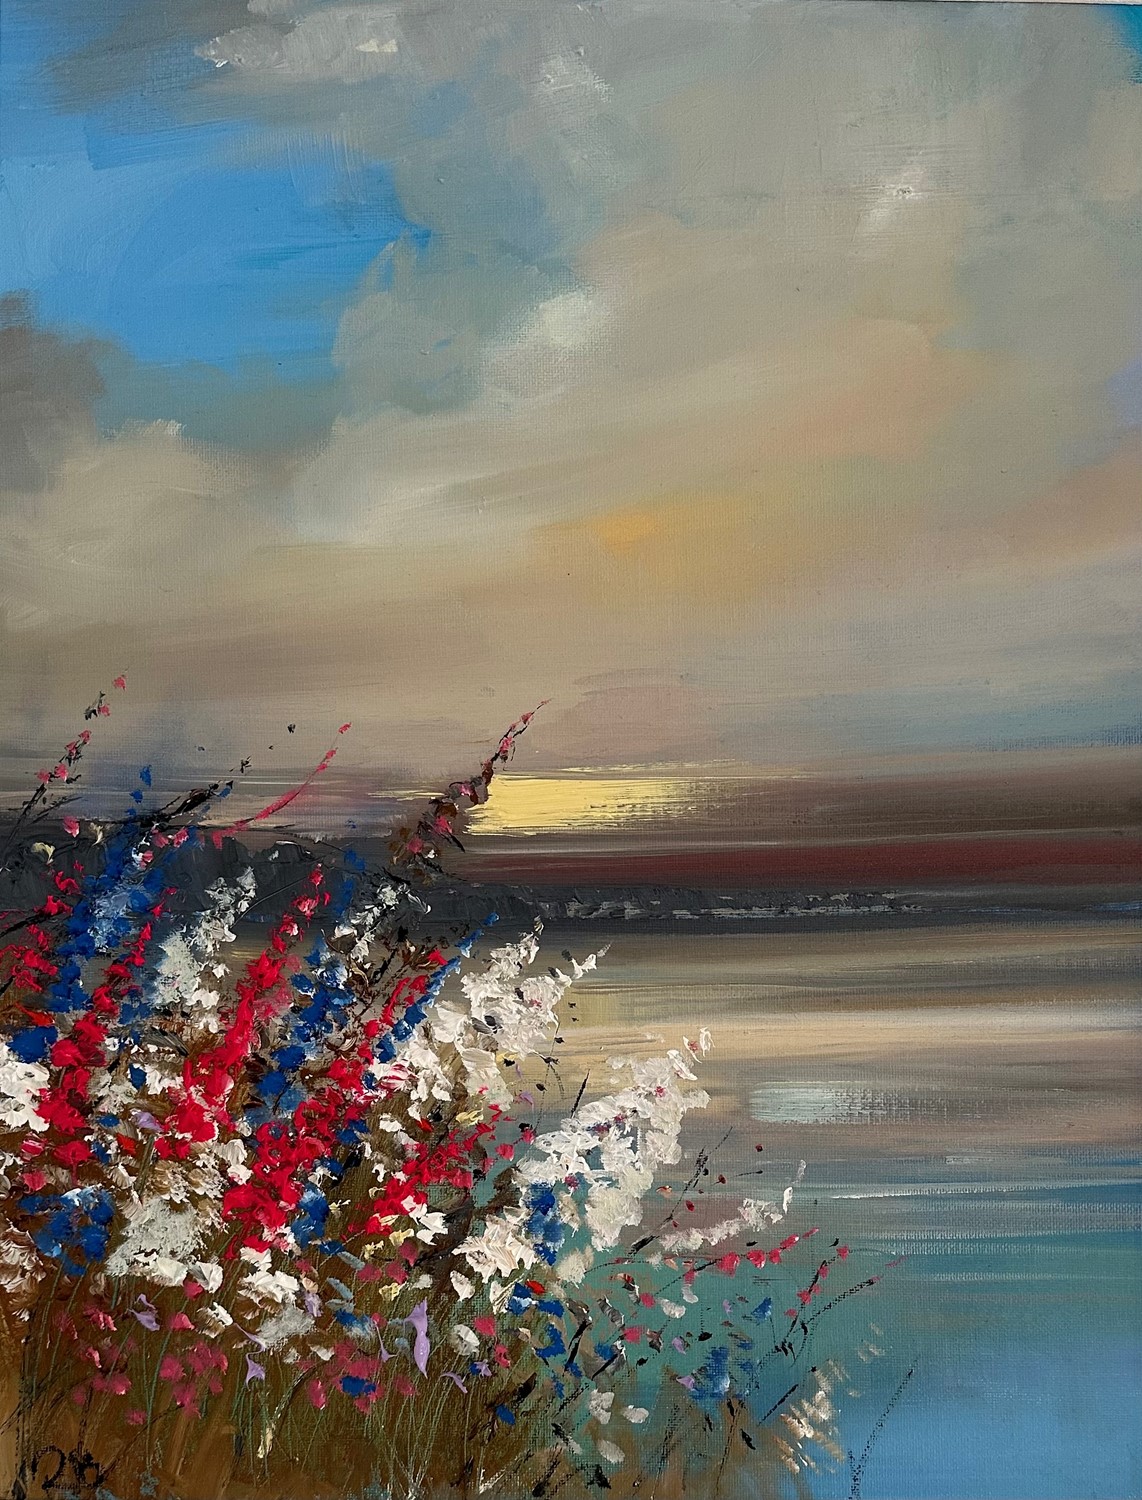 'Blooming by the Sea' by artist Rosanne Barr